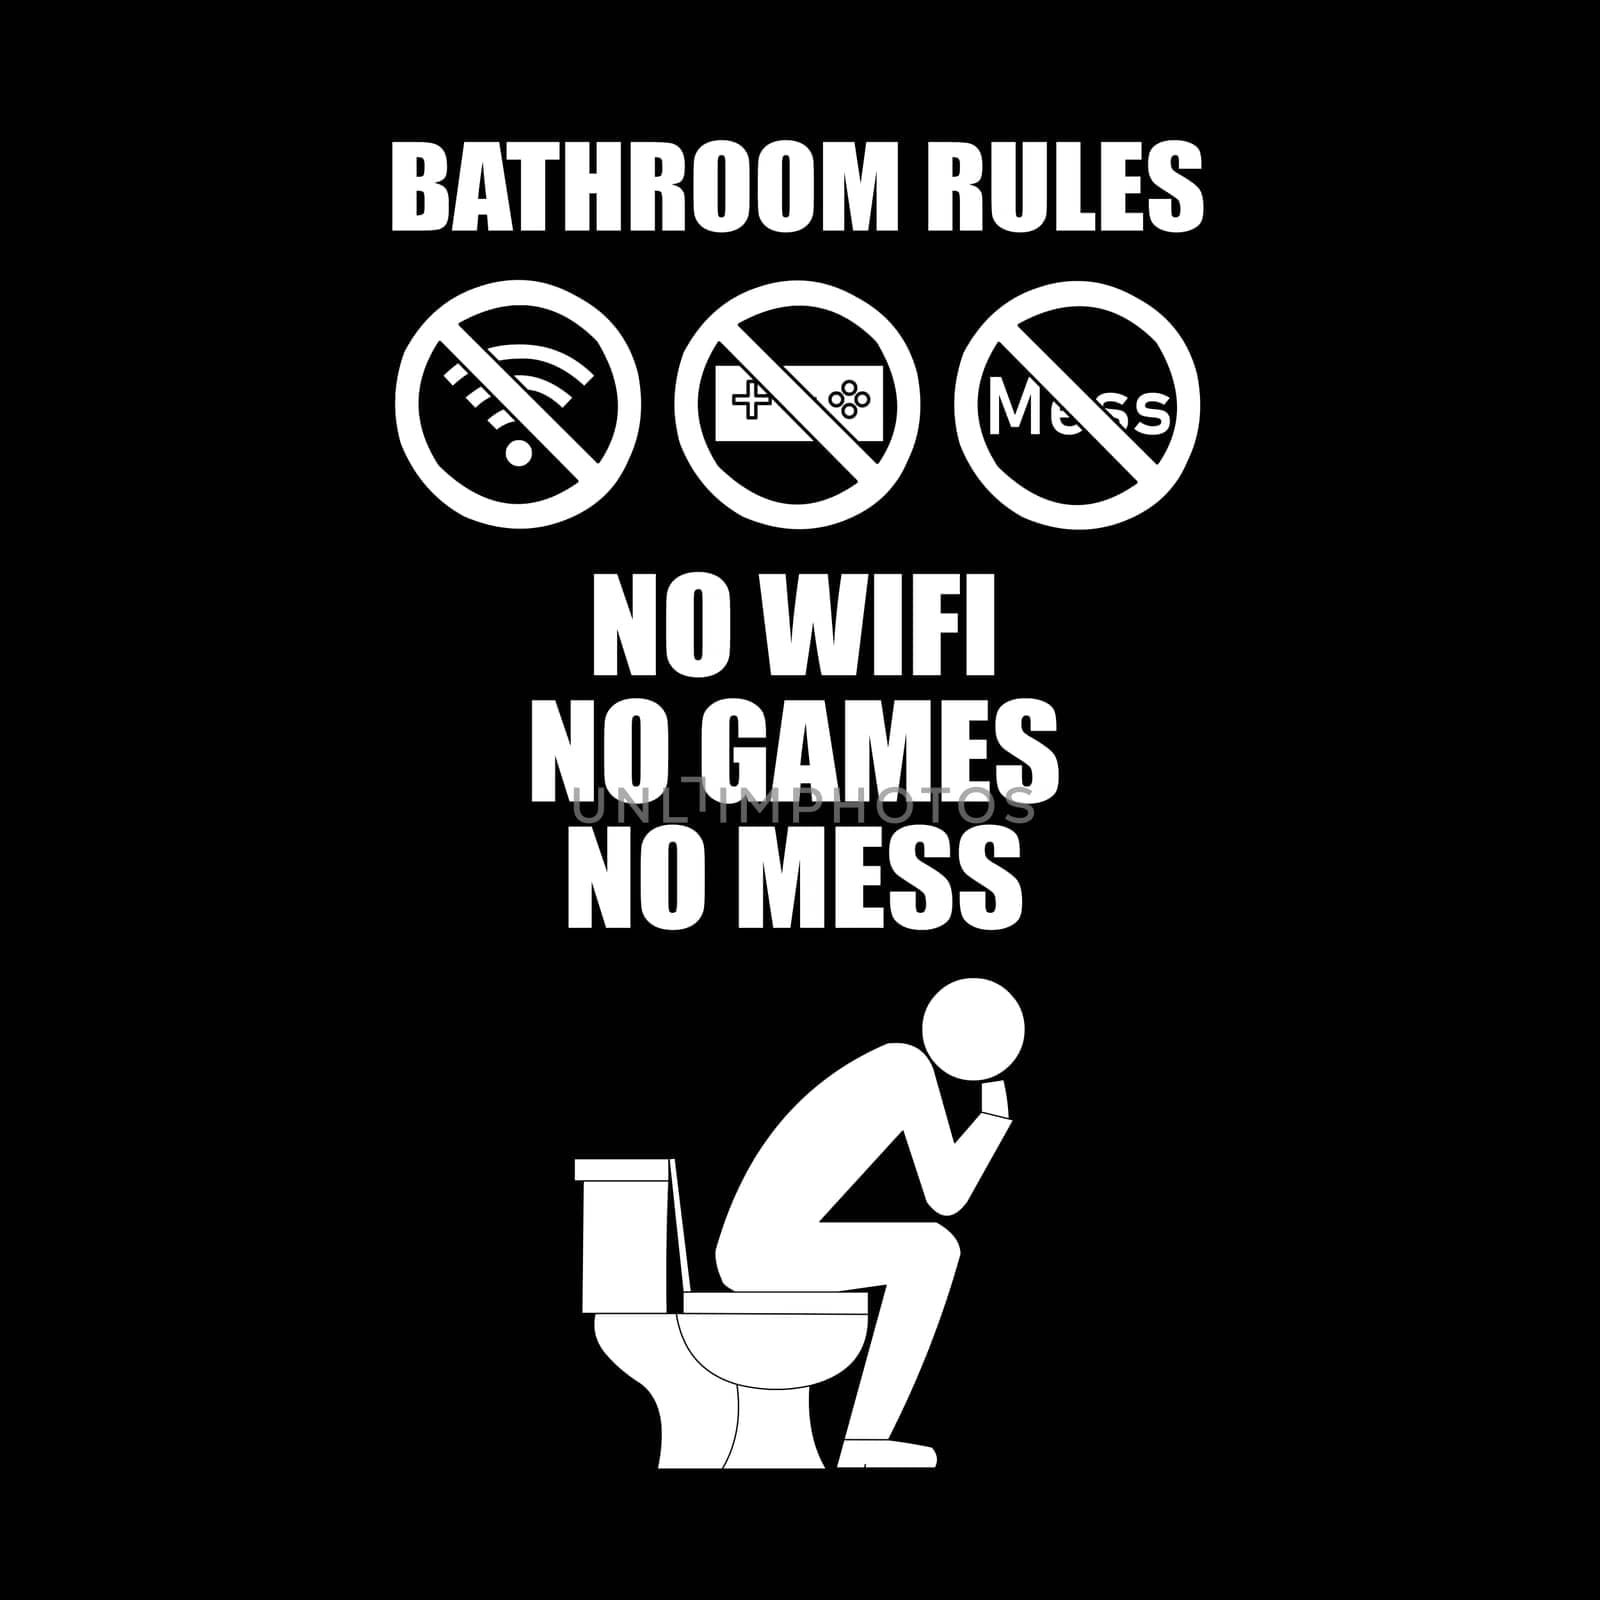 A set of bathroom rules with a person seating on the toilet.